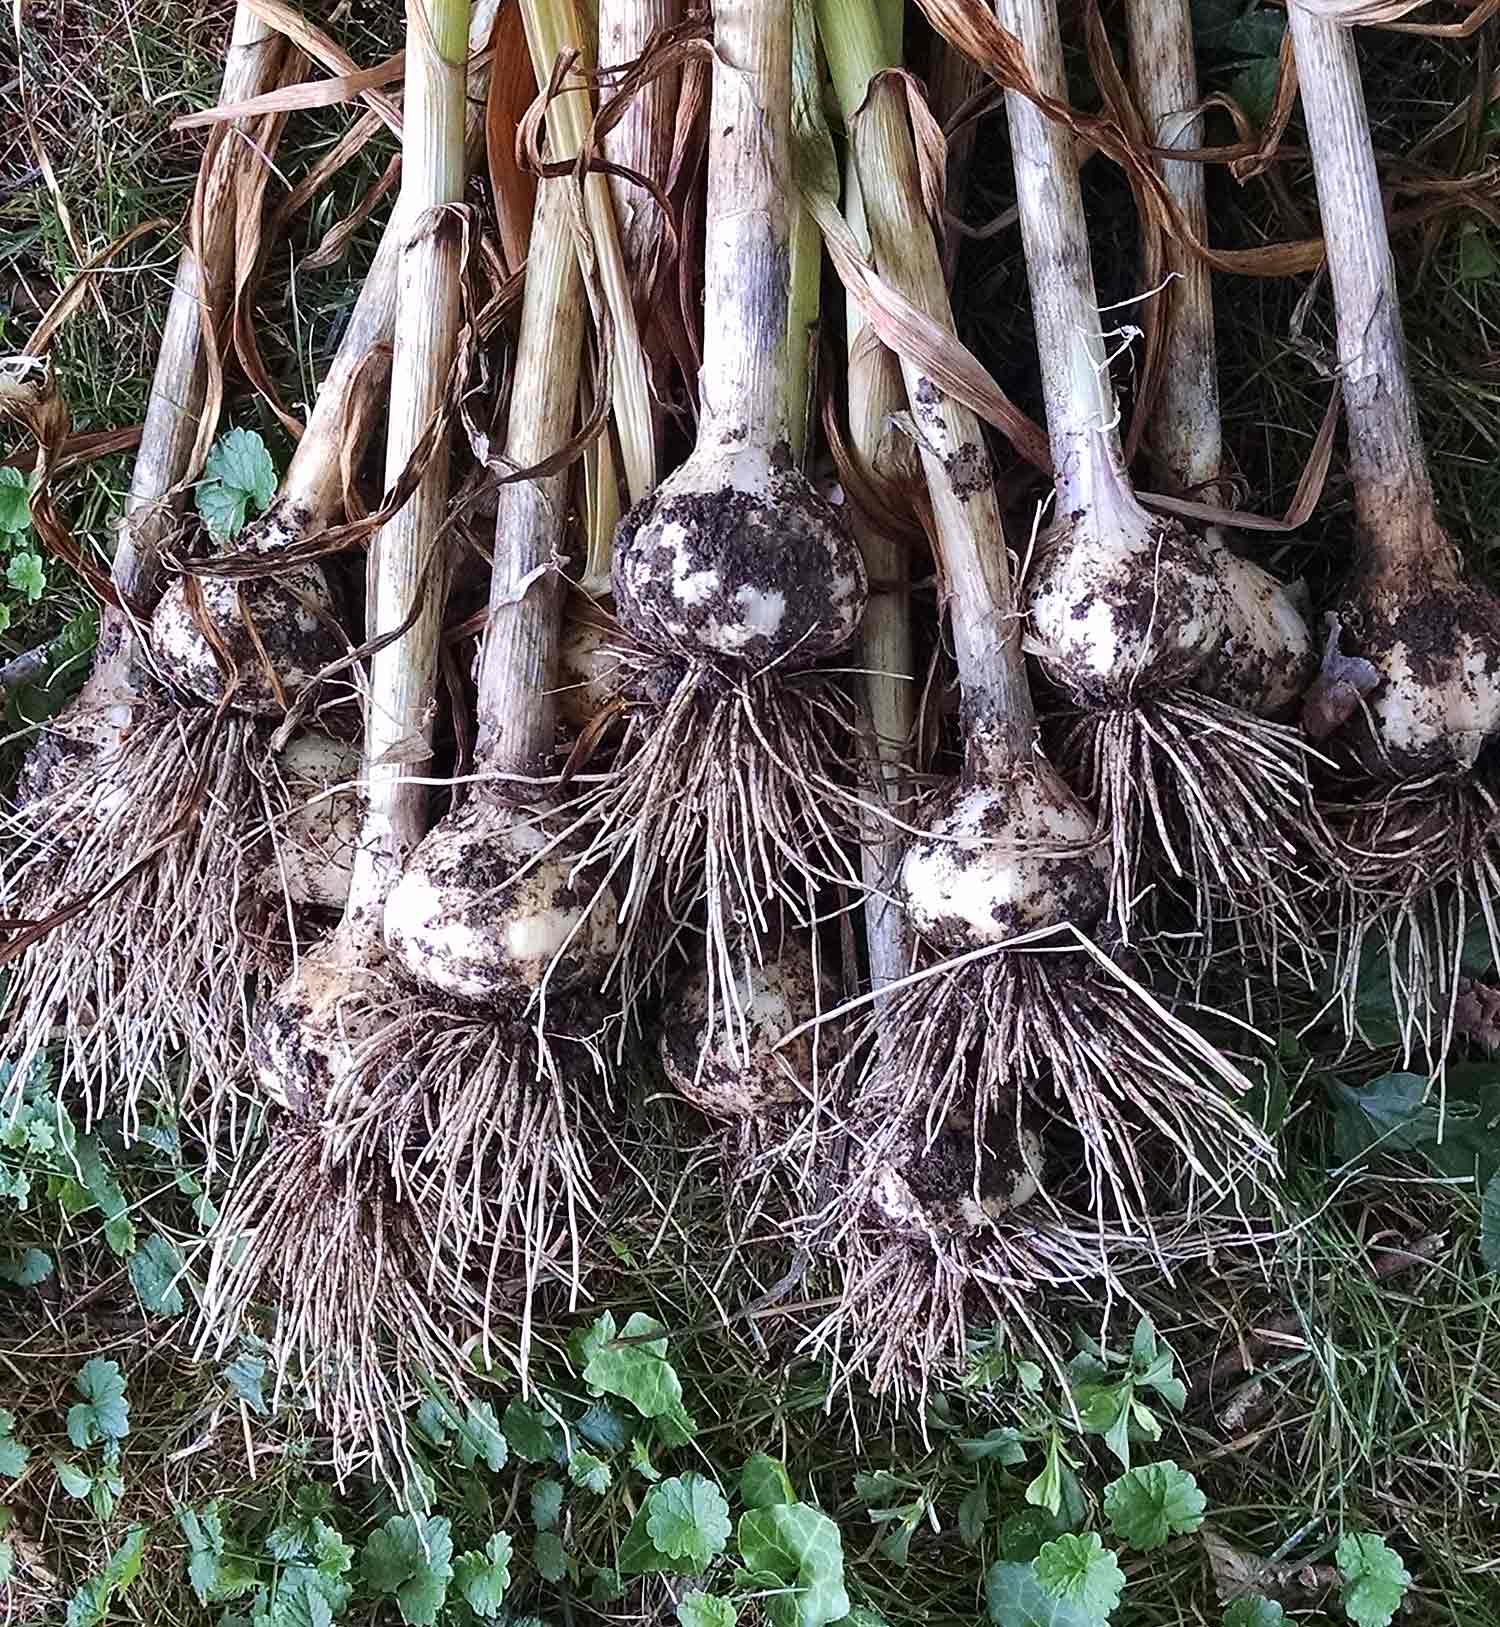 Newly harvested garlic bulbs with their large root systems.